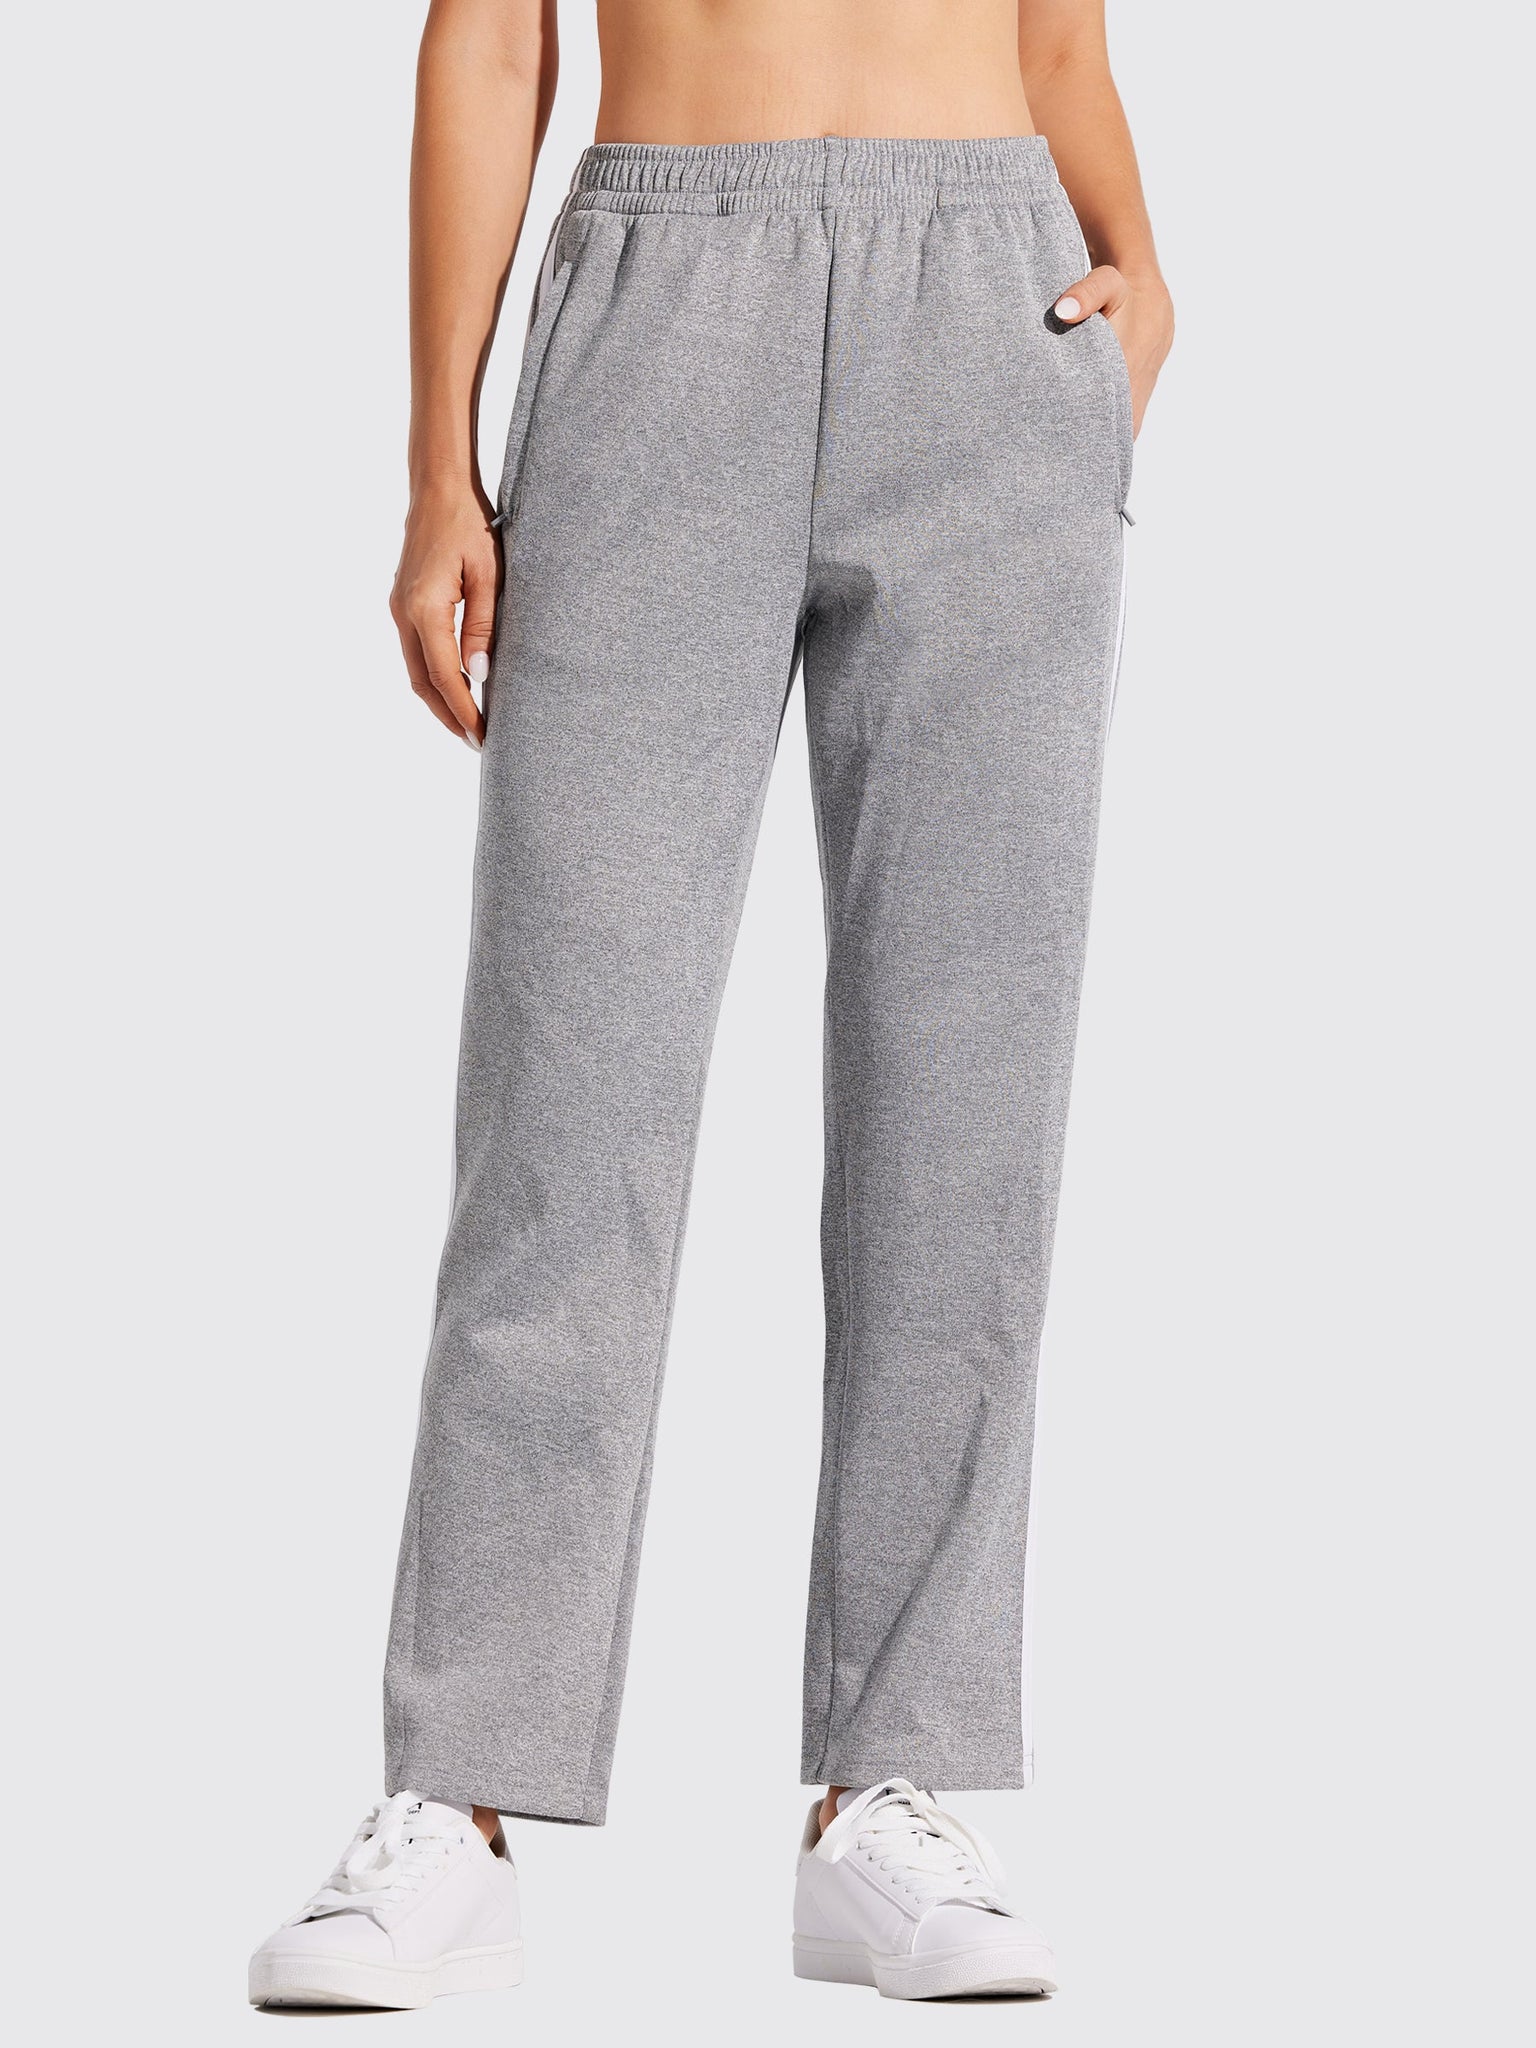 Willit Women's Warm Up Track Pants_CharcoalGray1